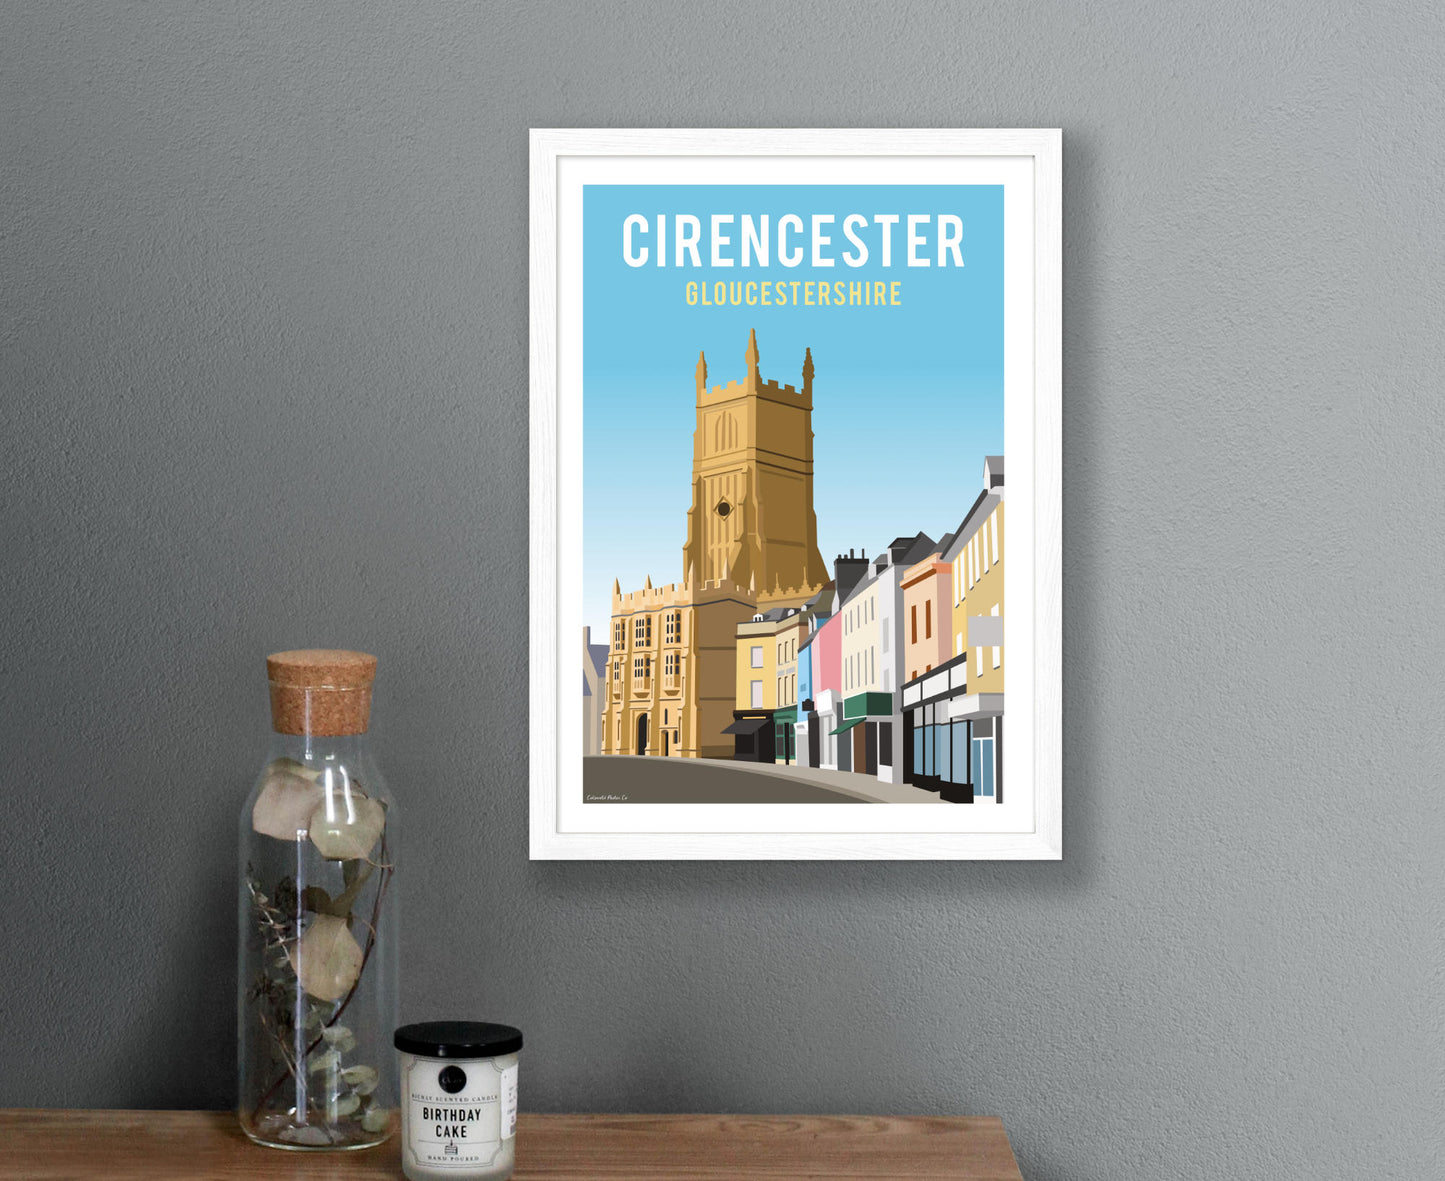 Cirencester church poster in white frame